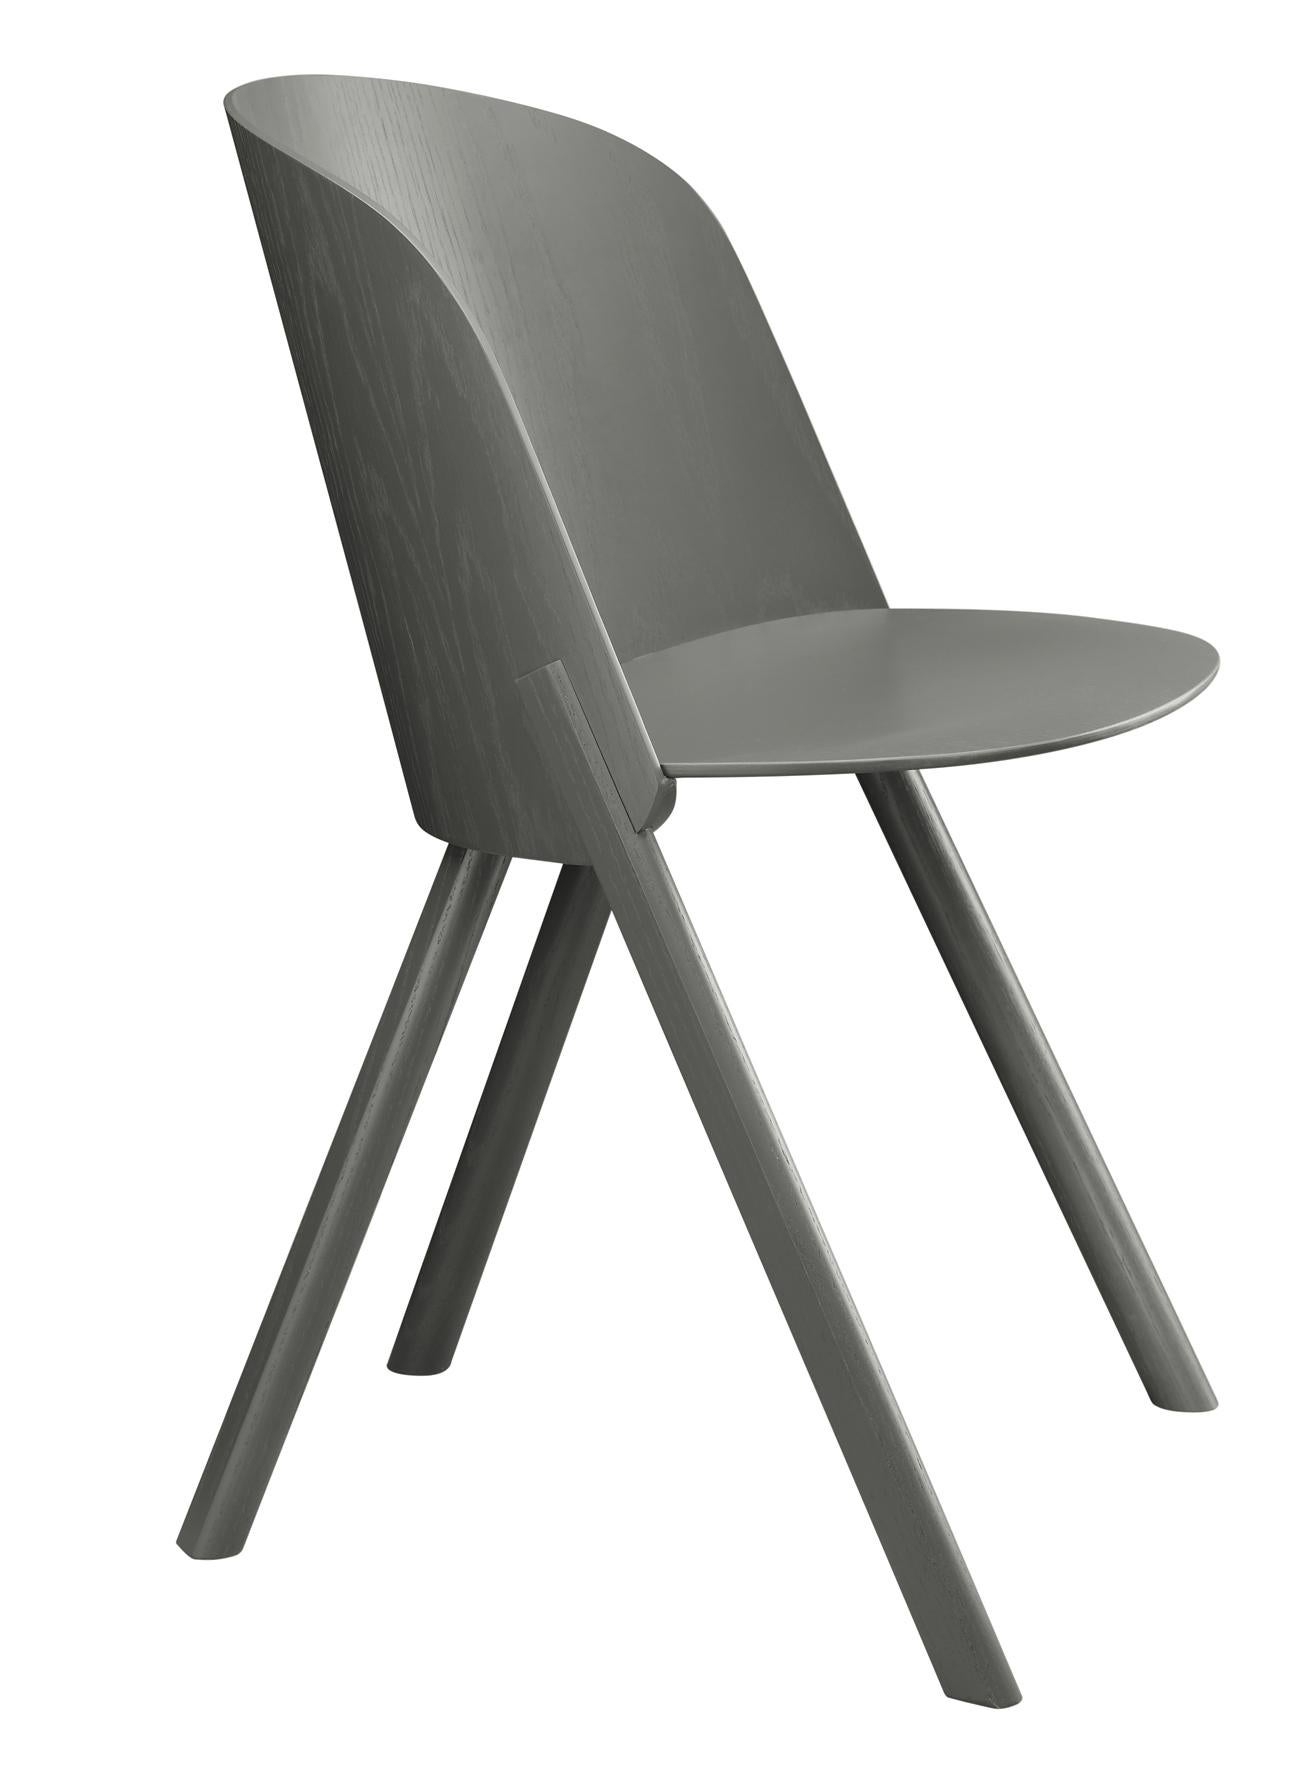 For Sale: Gray (Umbra Gray Lacquer) e15 Customizable This Side Chair by Stefan Diez